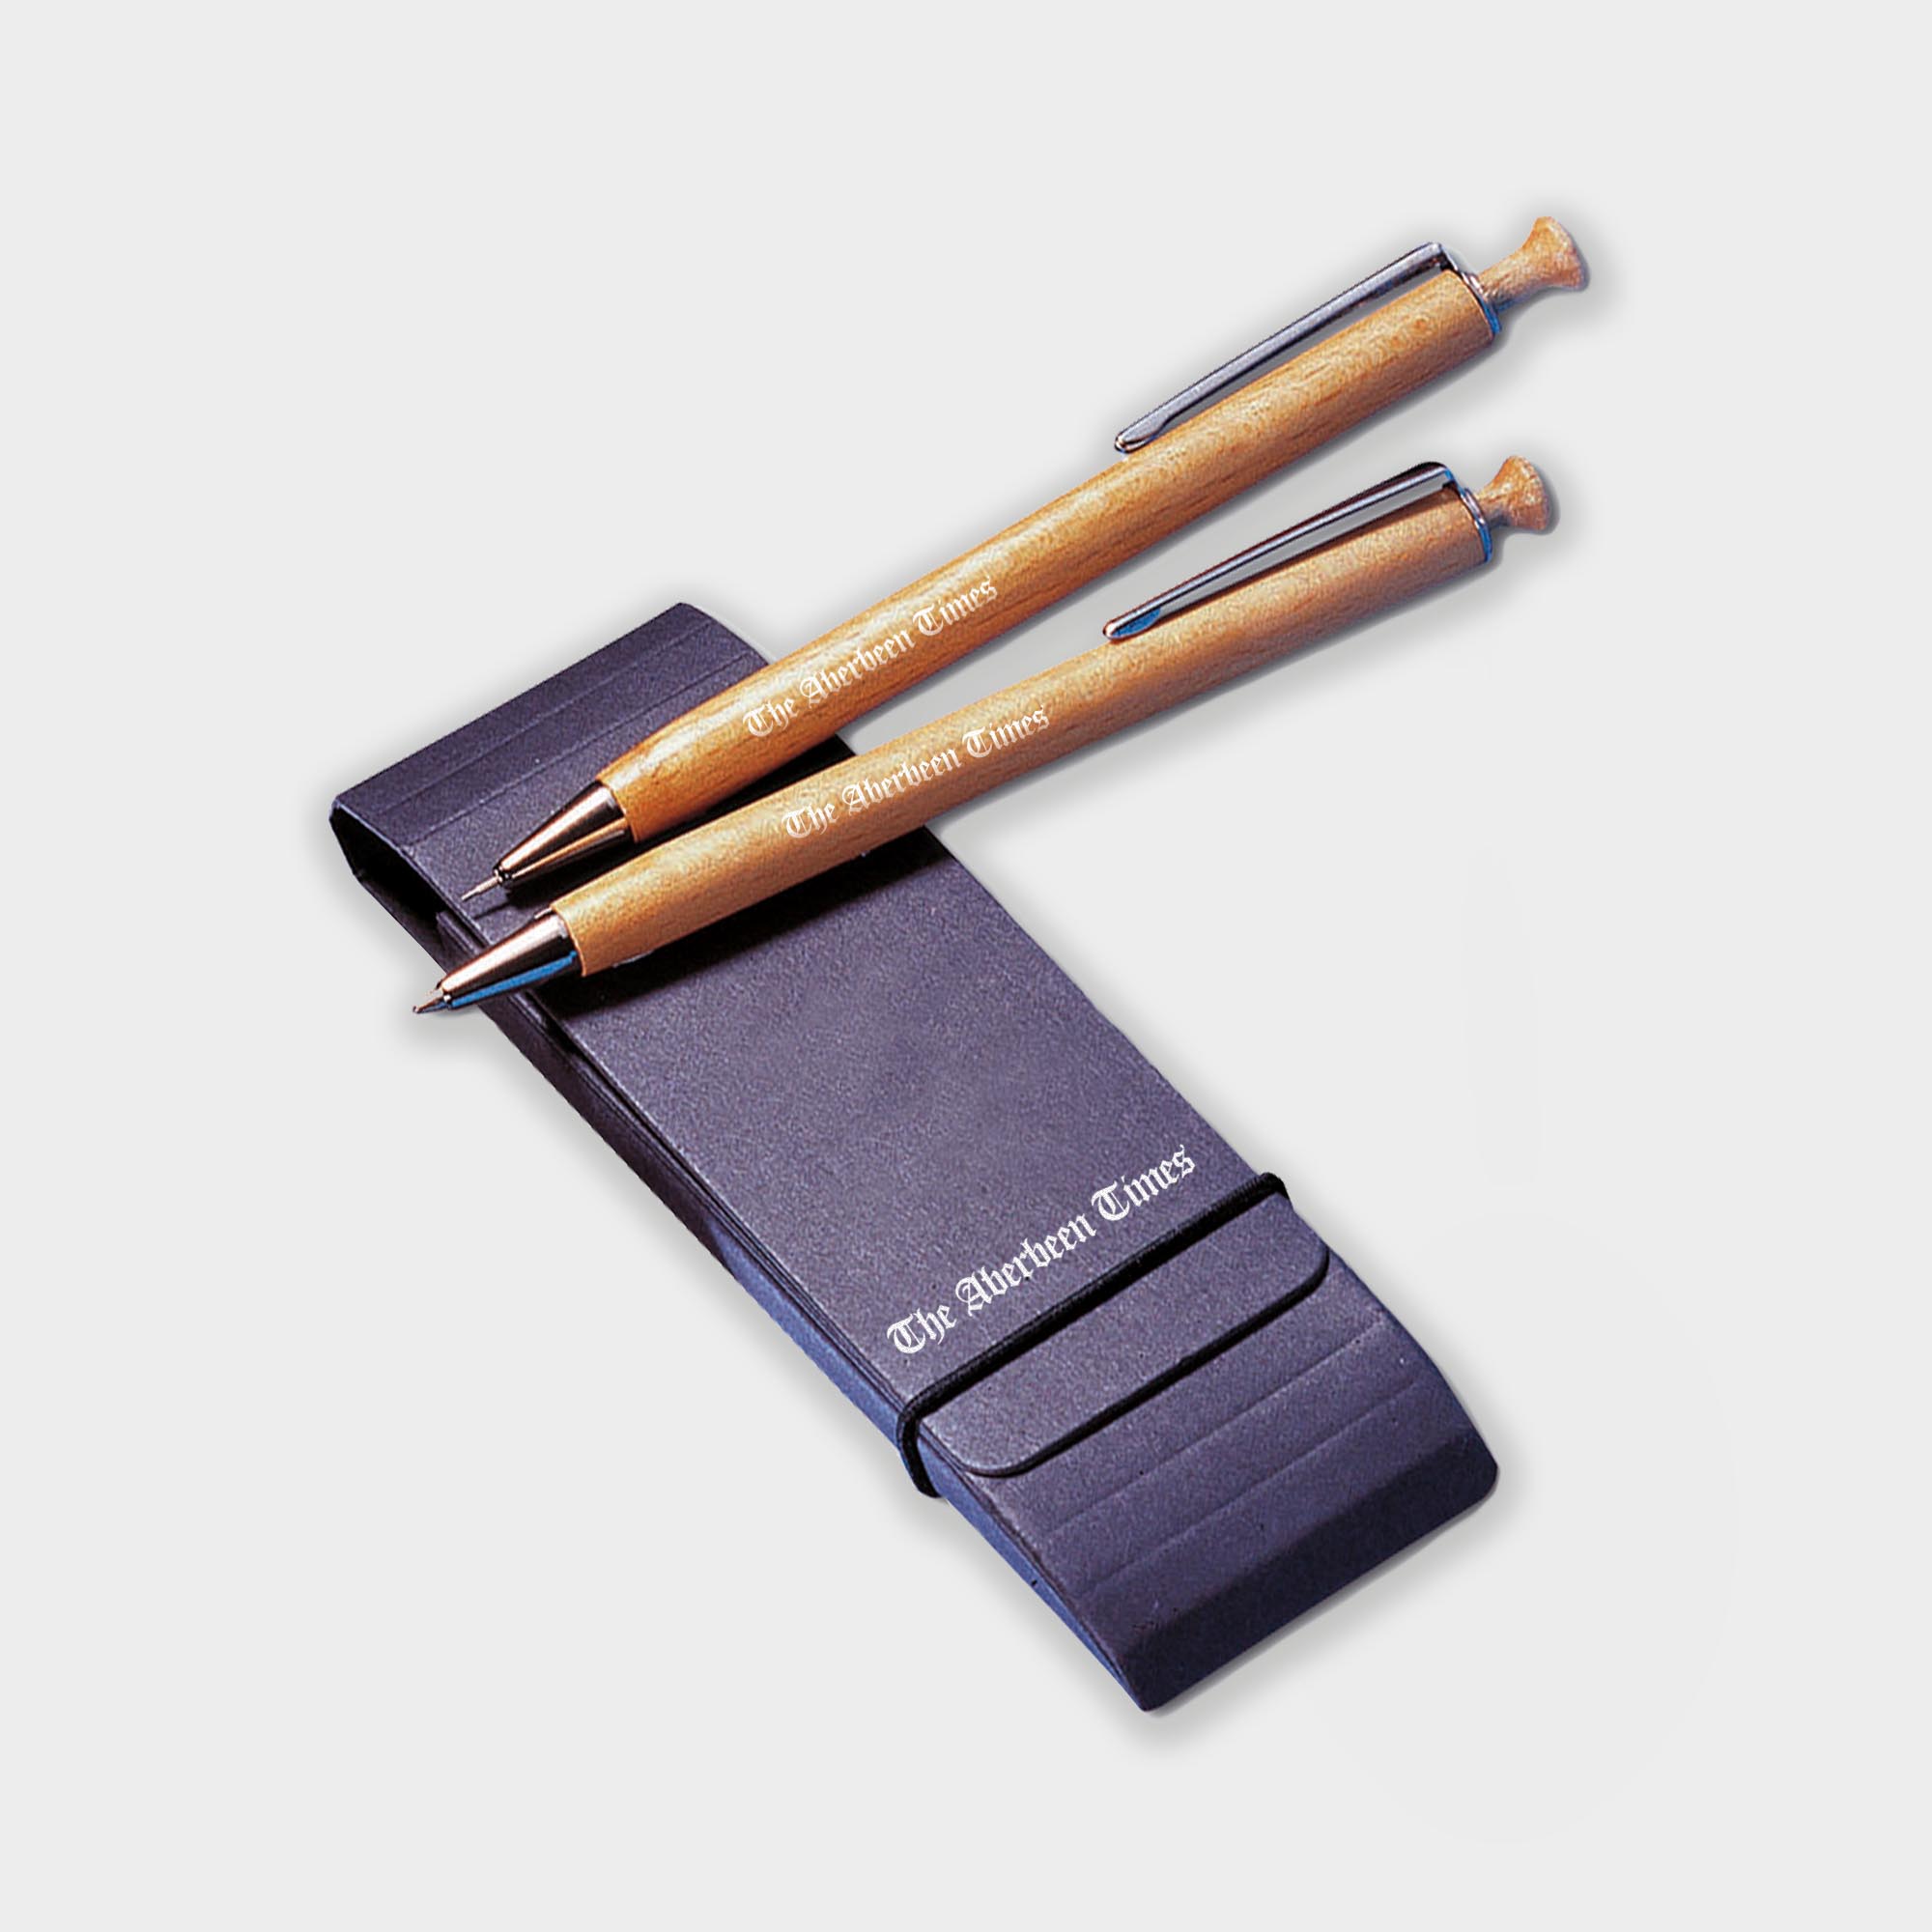 The Green & Good Albero Executive Pen and Pencil Set. Consisting of a sustainable timber pen & pencil. Both come inside a black recycled card wallet.